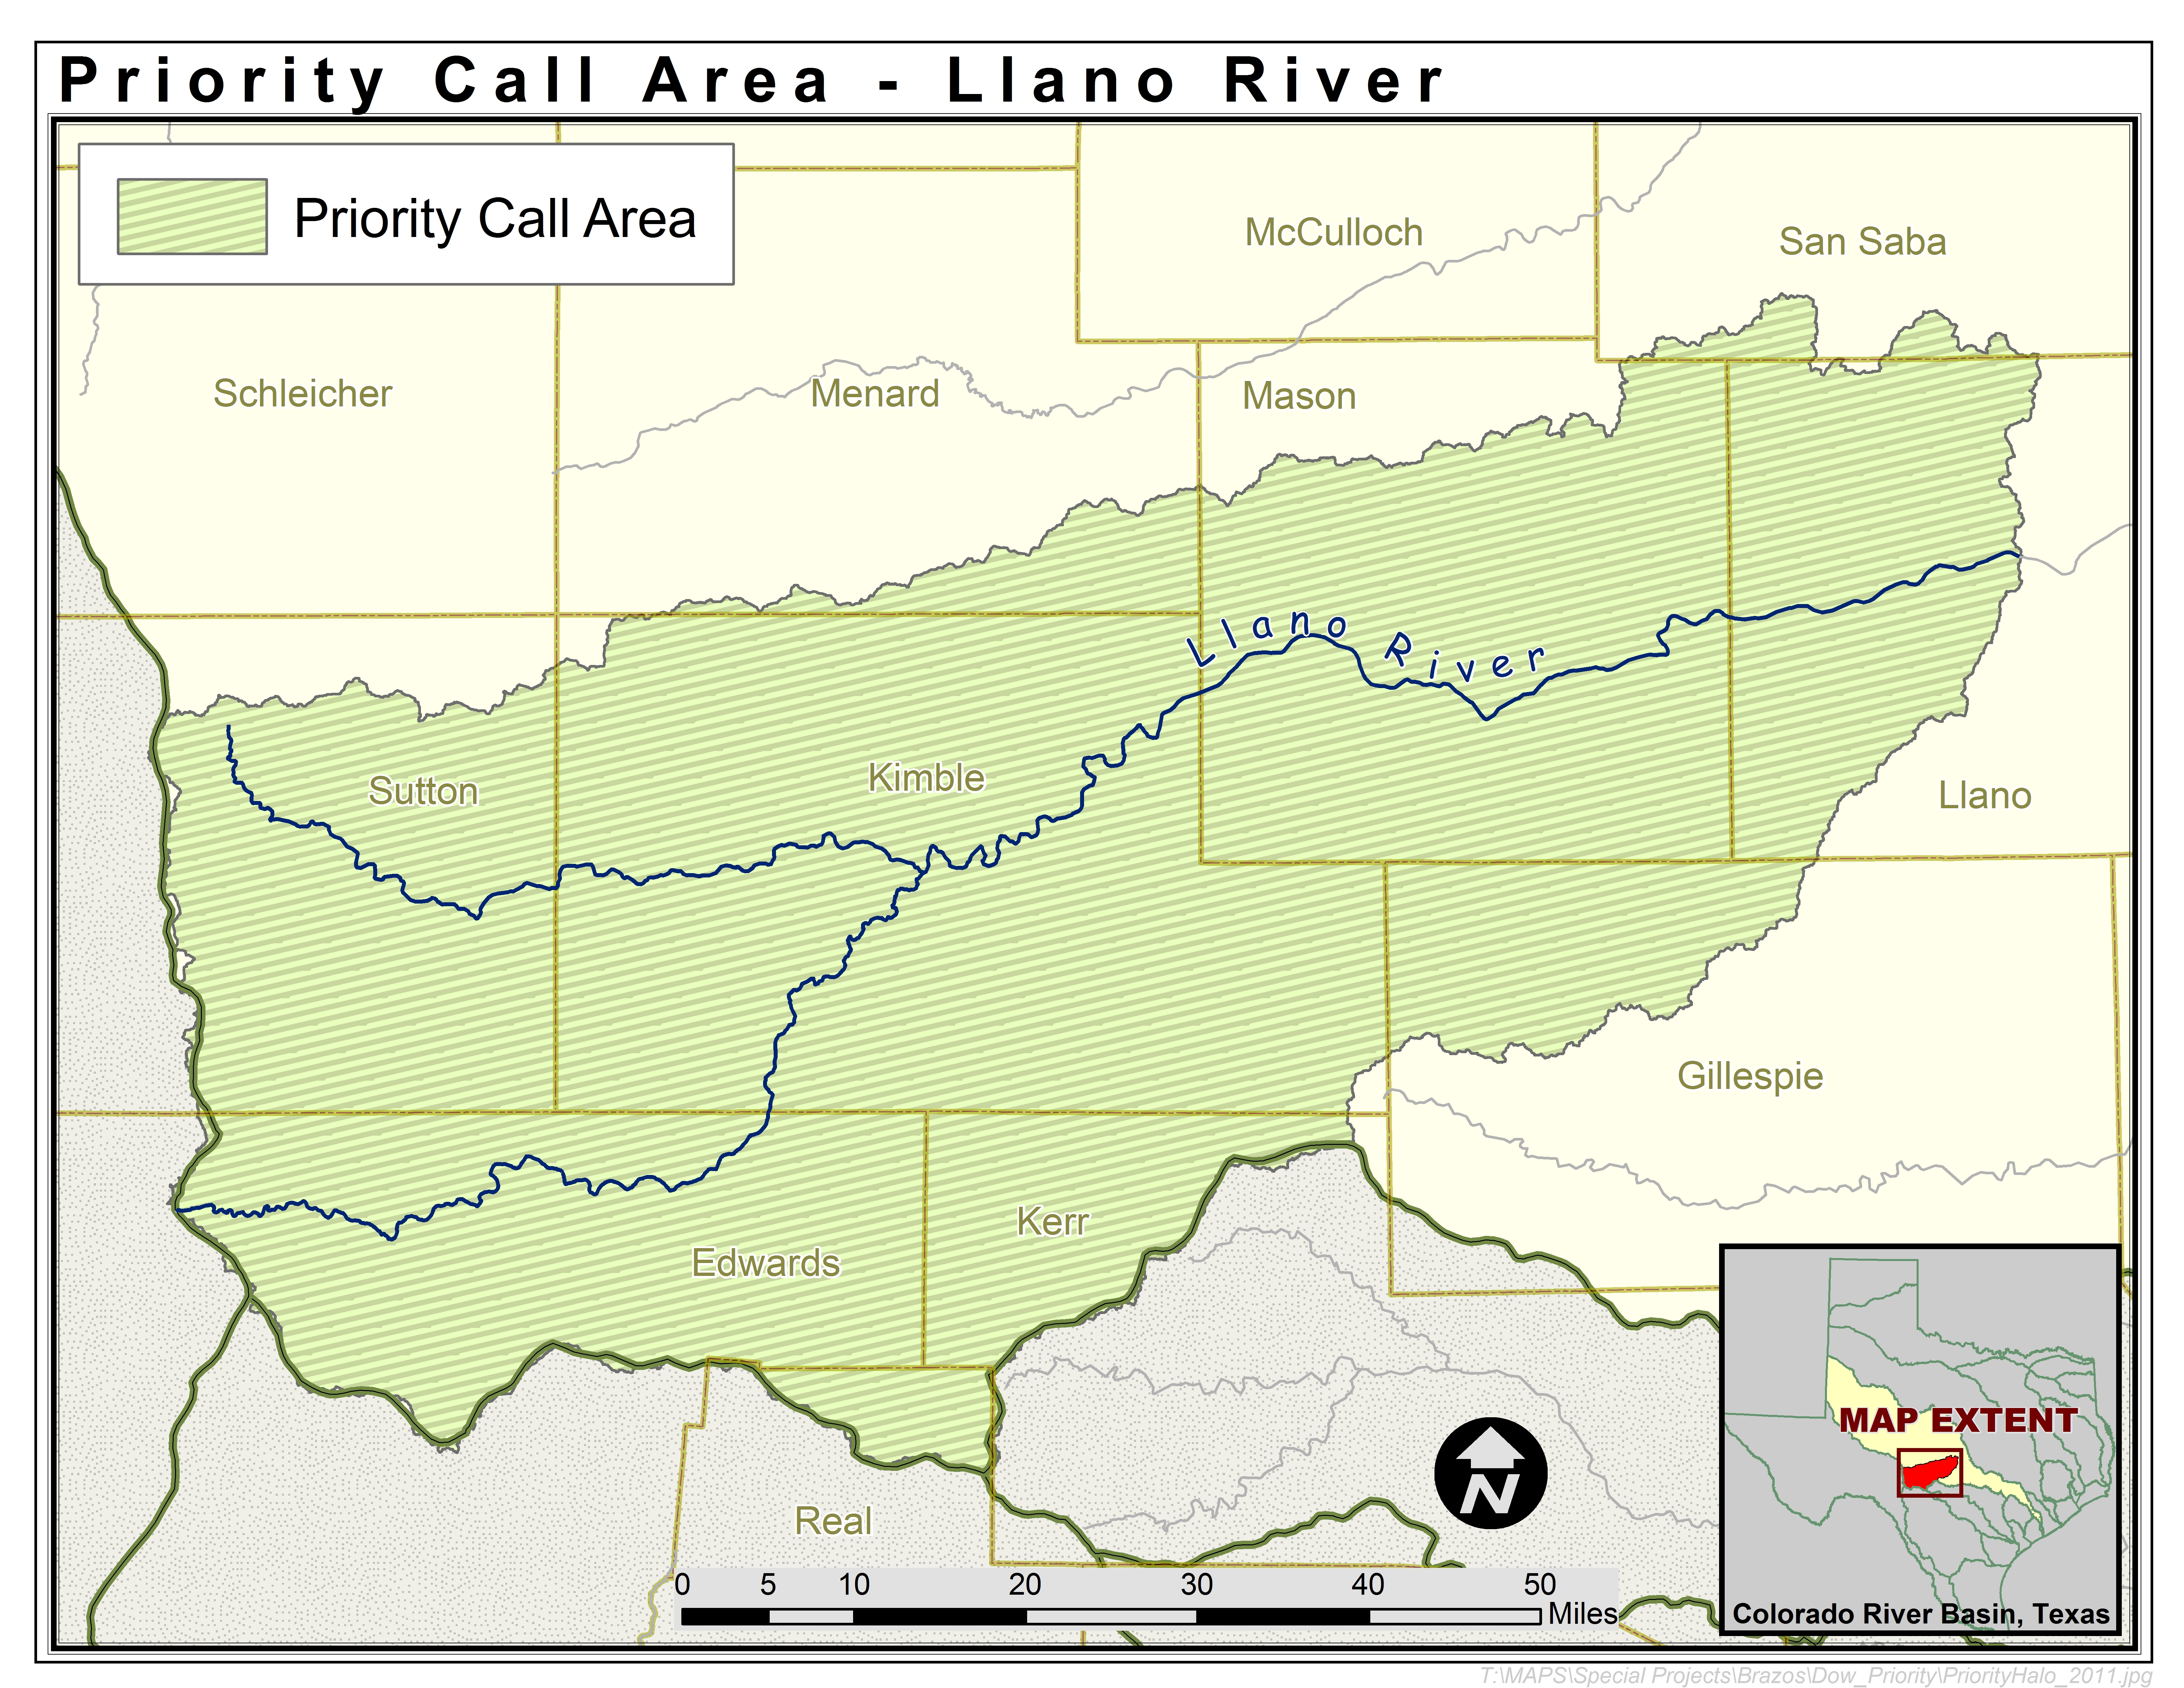 Map of the Llano River Priority Call Area